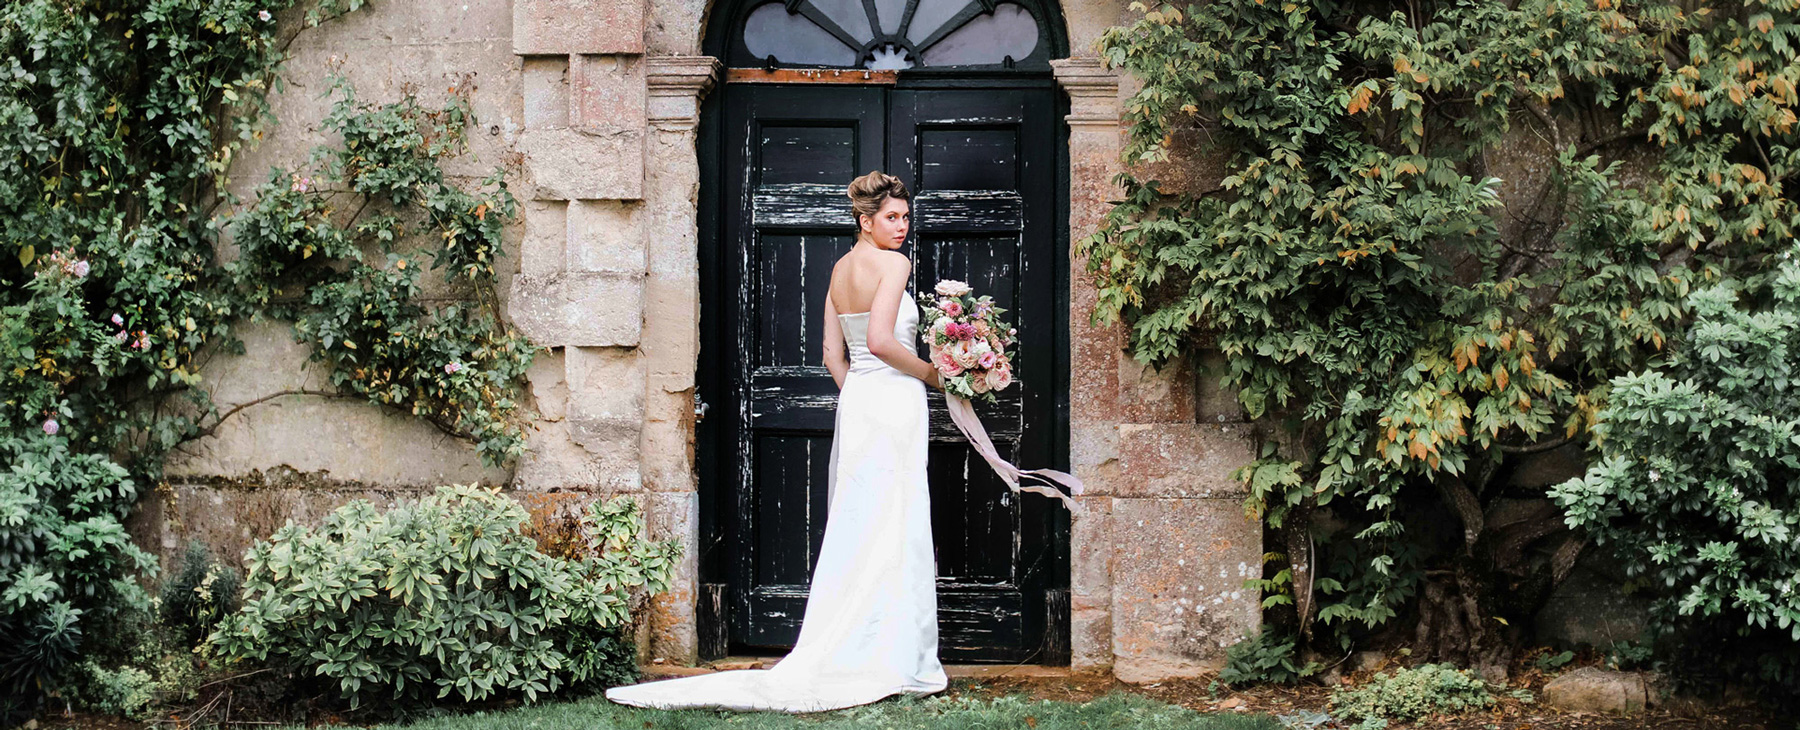 Exclusive hire Oxfordshire country house wedding venue